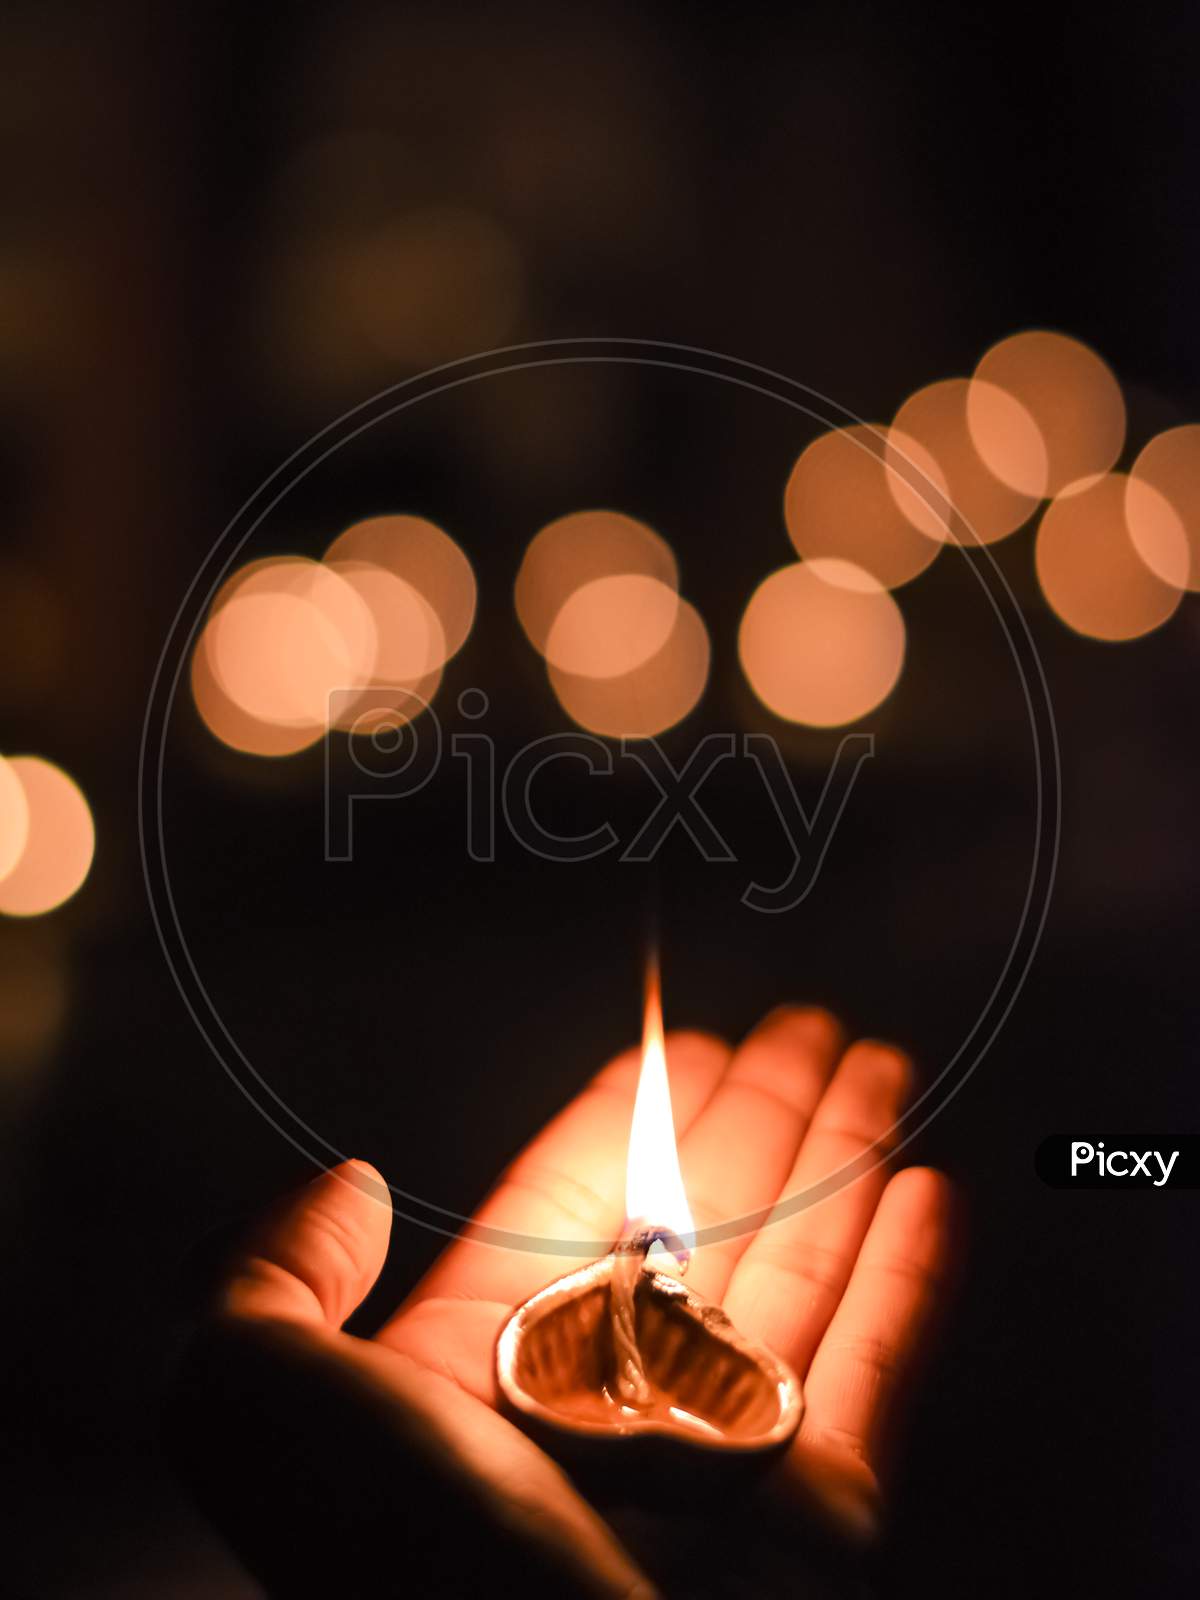 Portrait Photo Taken During Diwali Festival Night Of The Lit Clay Diya Oil Lamp Held In The Hand With Orange Light Bokeh As Background.